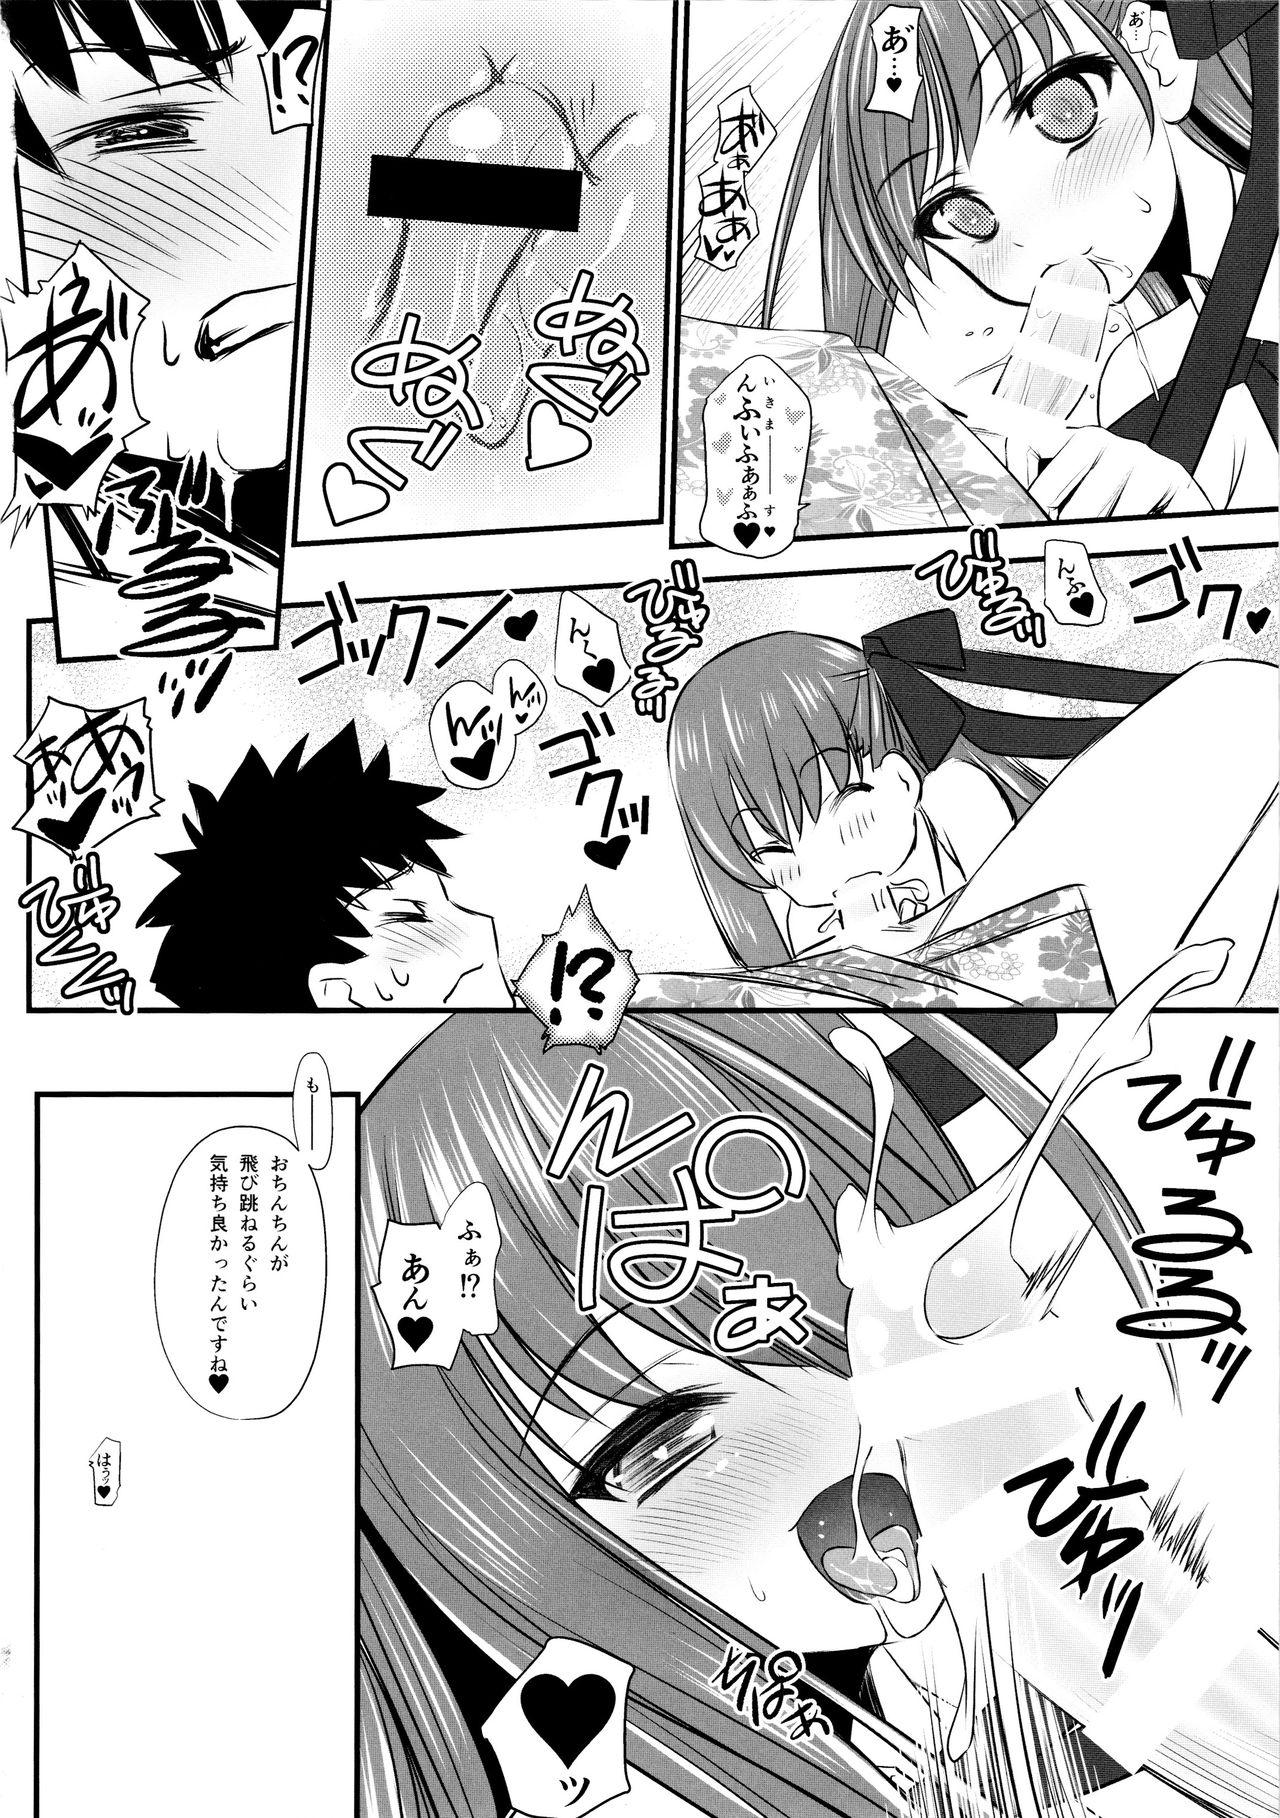 Art (C96) [Yakan Honpo (Inoue Tommy)] Queen [Kyuuin] BB-chan (Fate/Grand Order) - Fate grand order Bizarre - Page 6